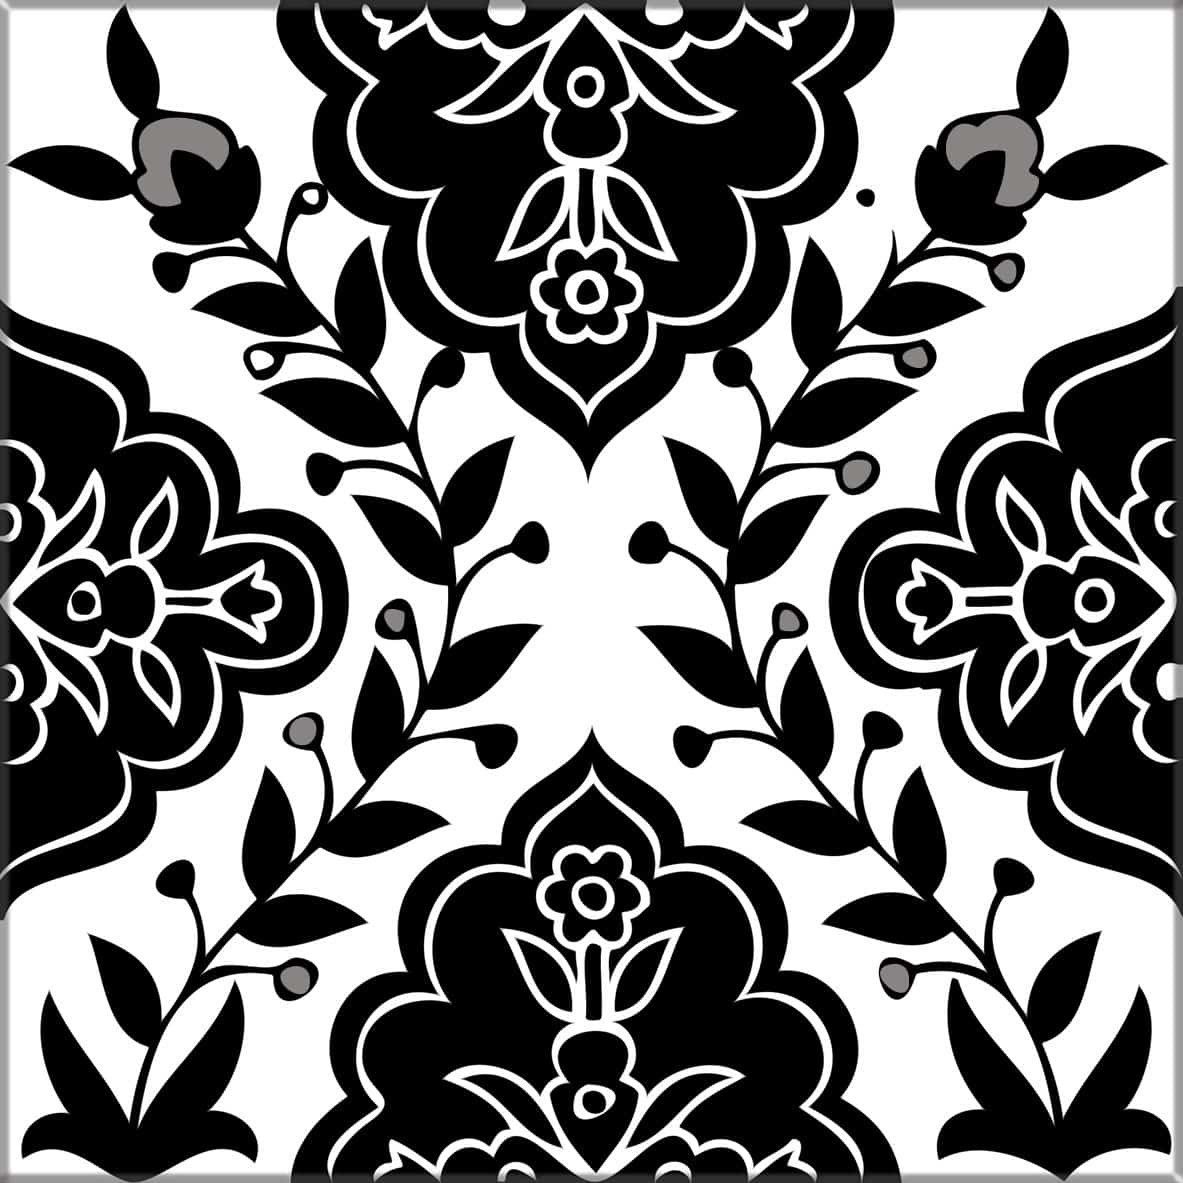 Persian series black and white tile